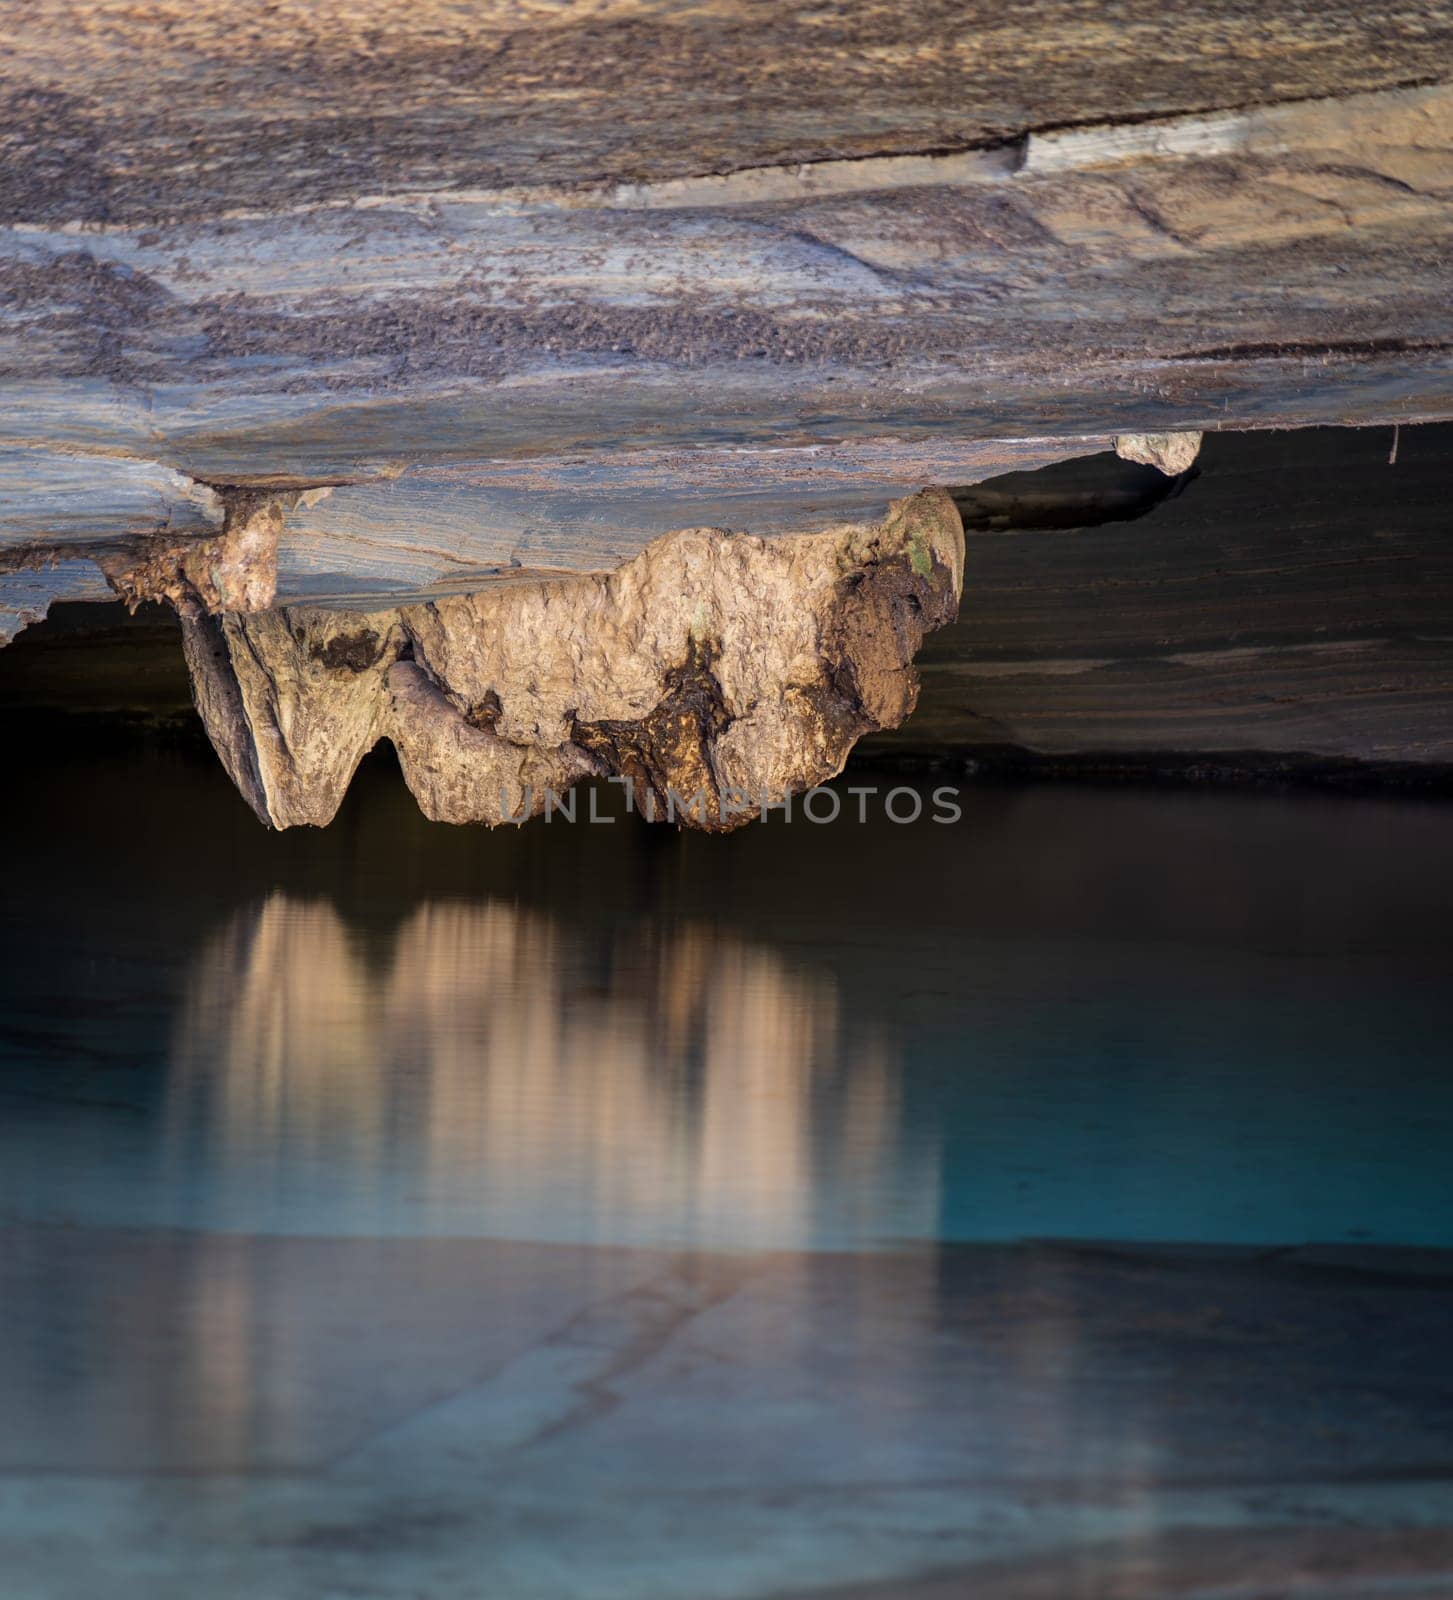 A huge stalactite reflects in a clear lagoon inside a brightly lit ancient cave, providing space for text